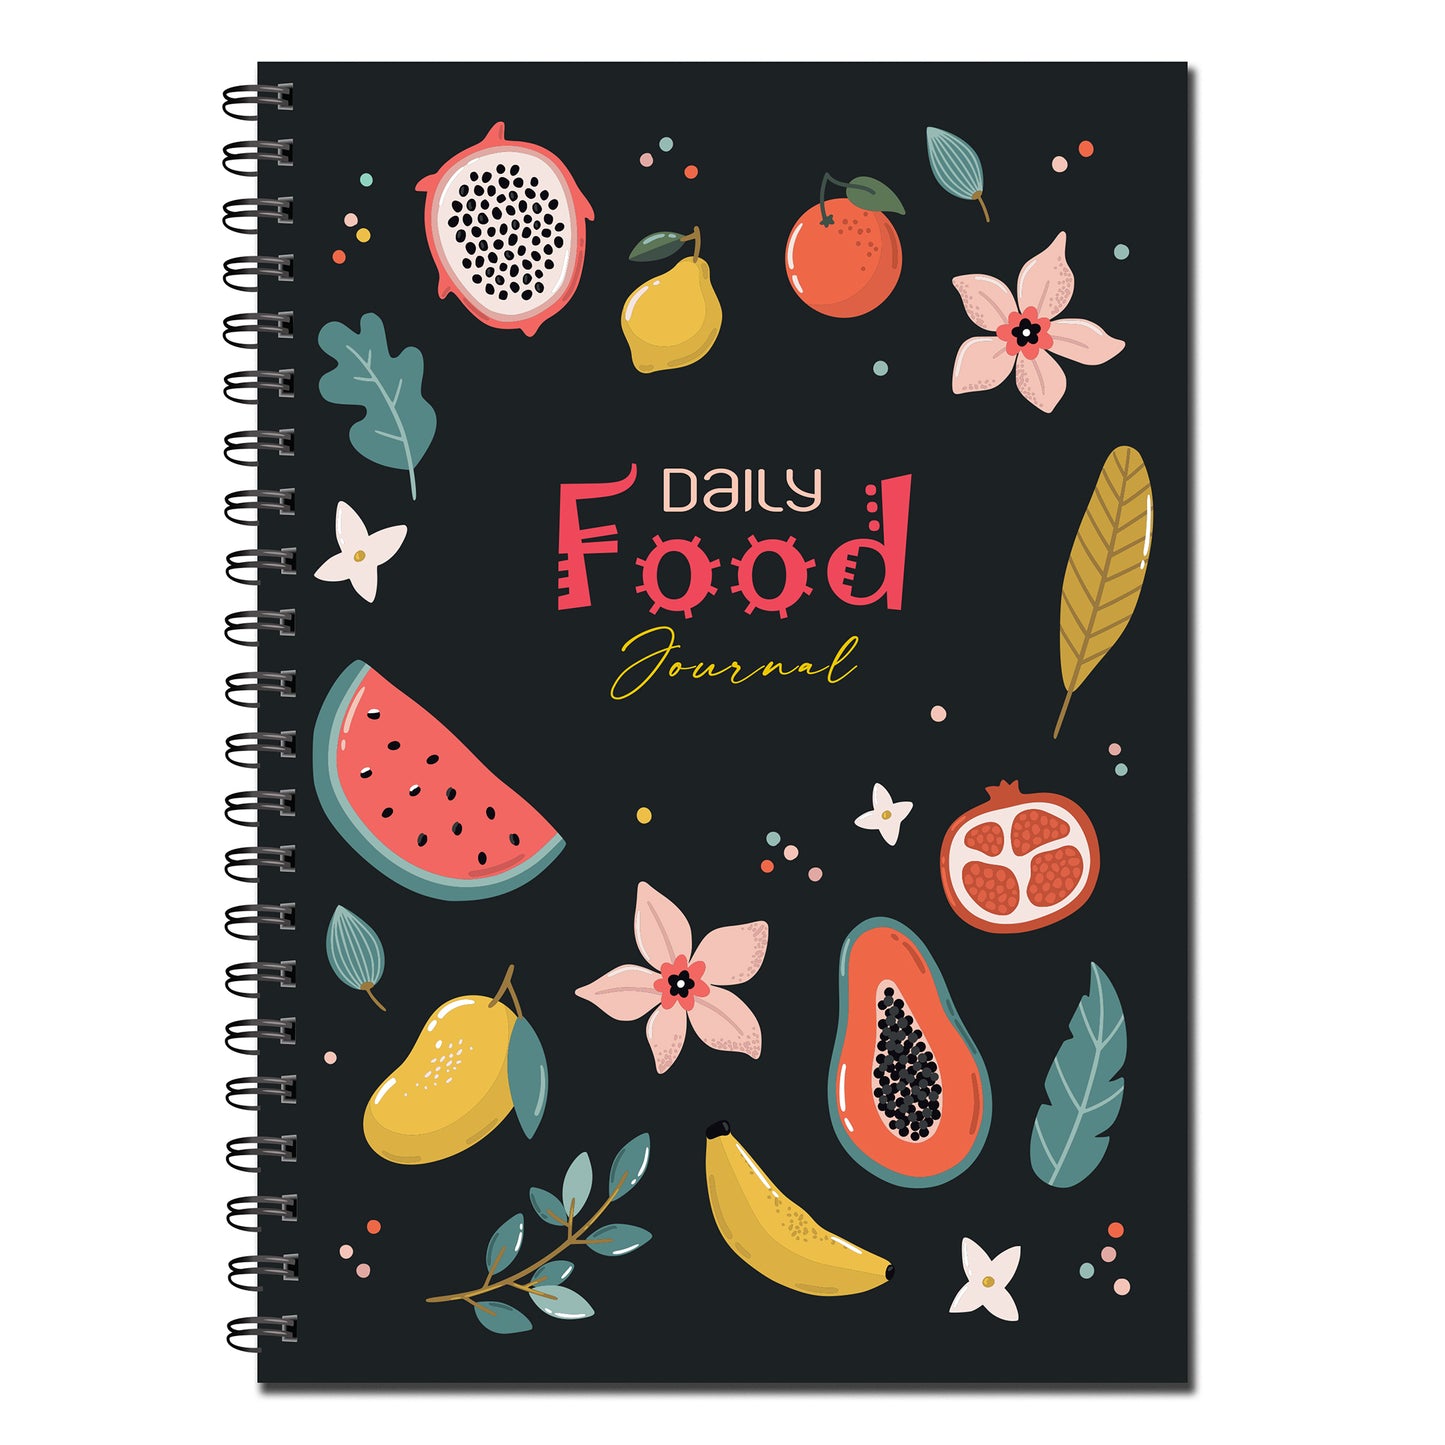 Designer Daily Food Journal A5 120gsm 50 double sided pages Wirobound